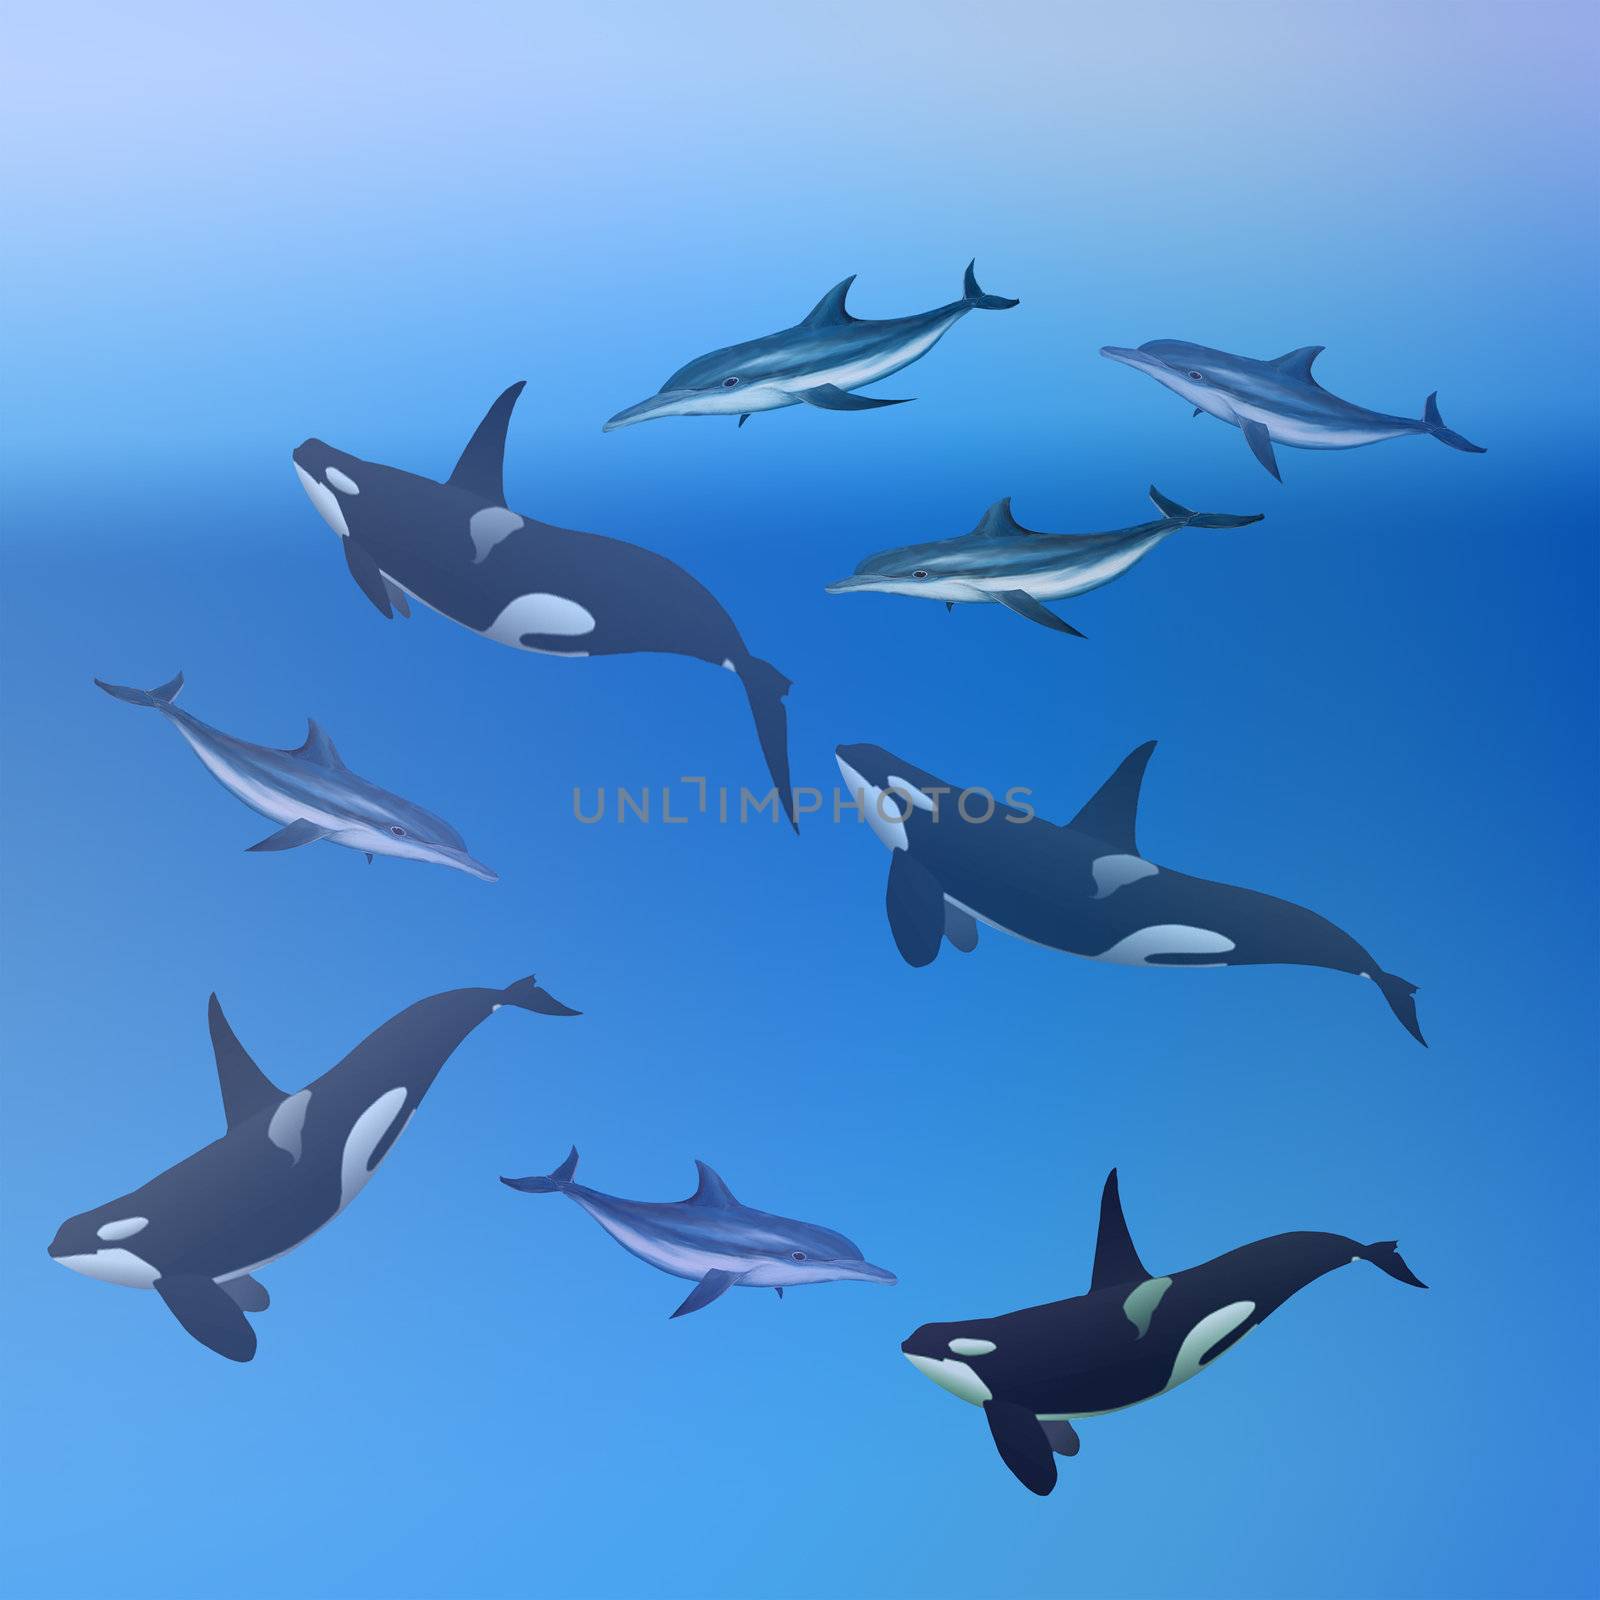 Whales and Dolphins Background by hicster